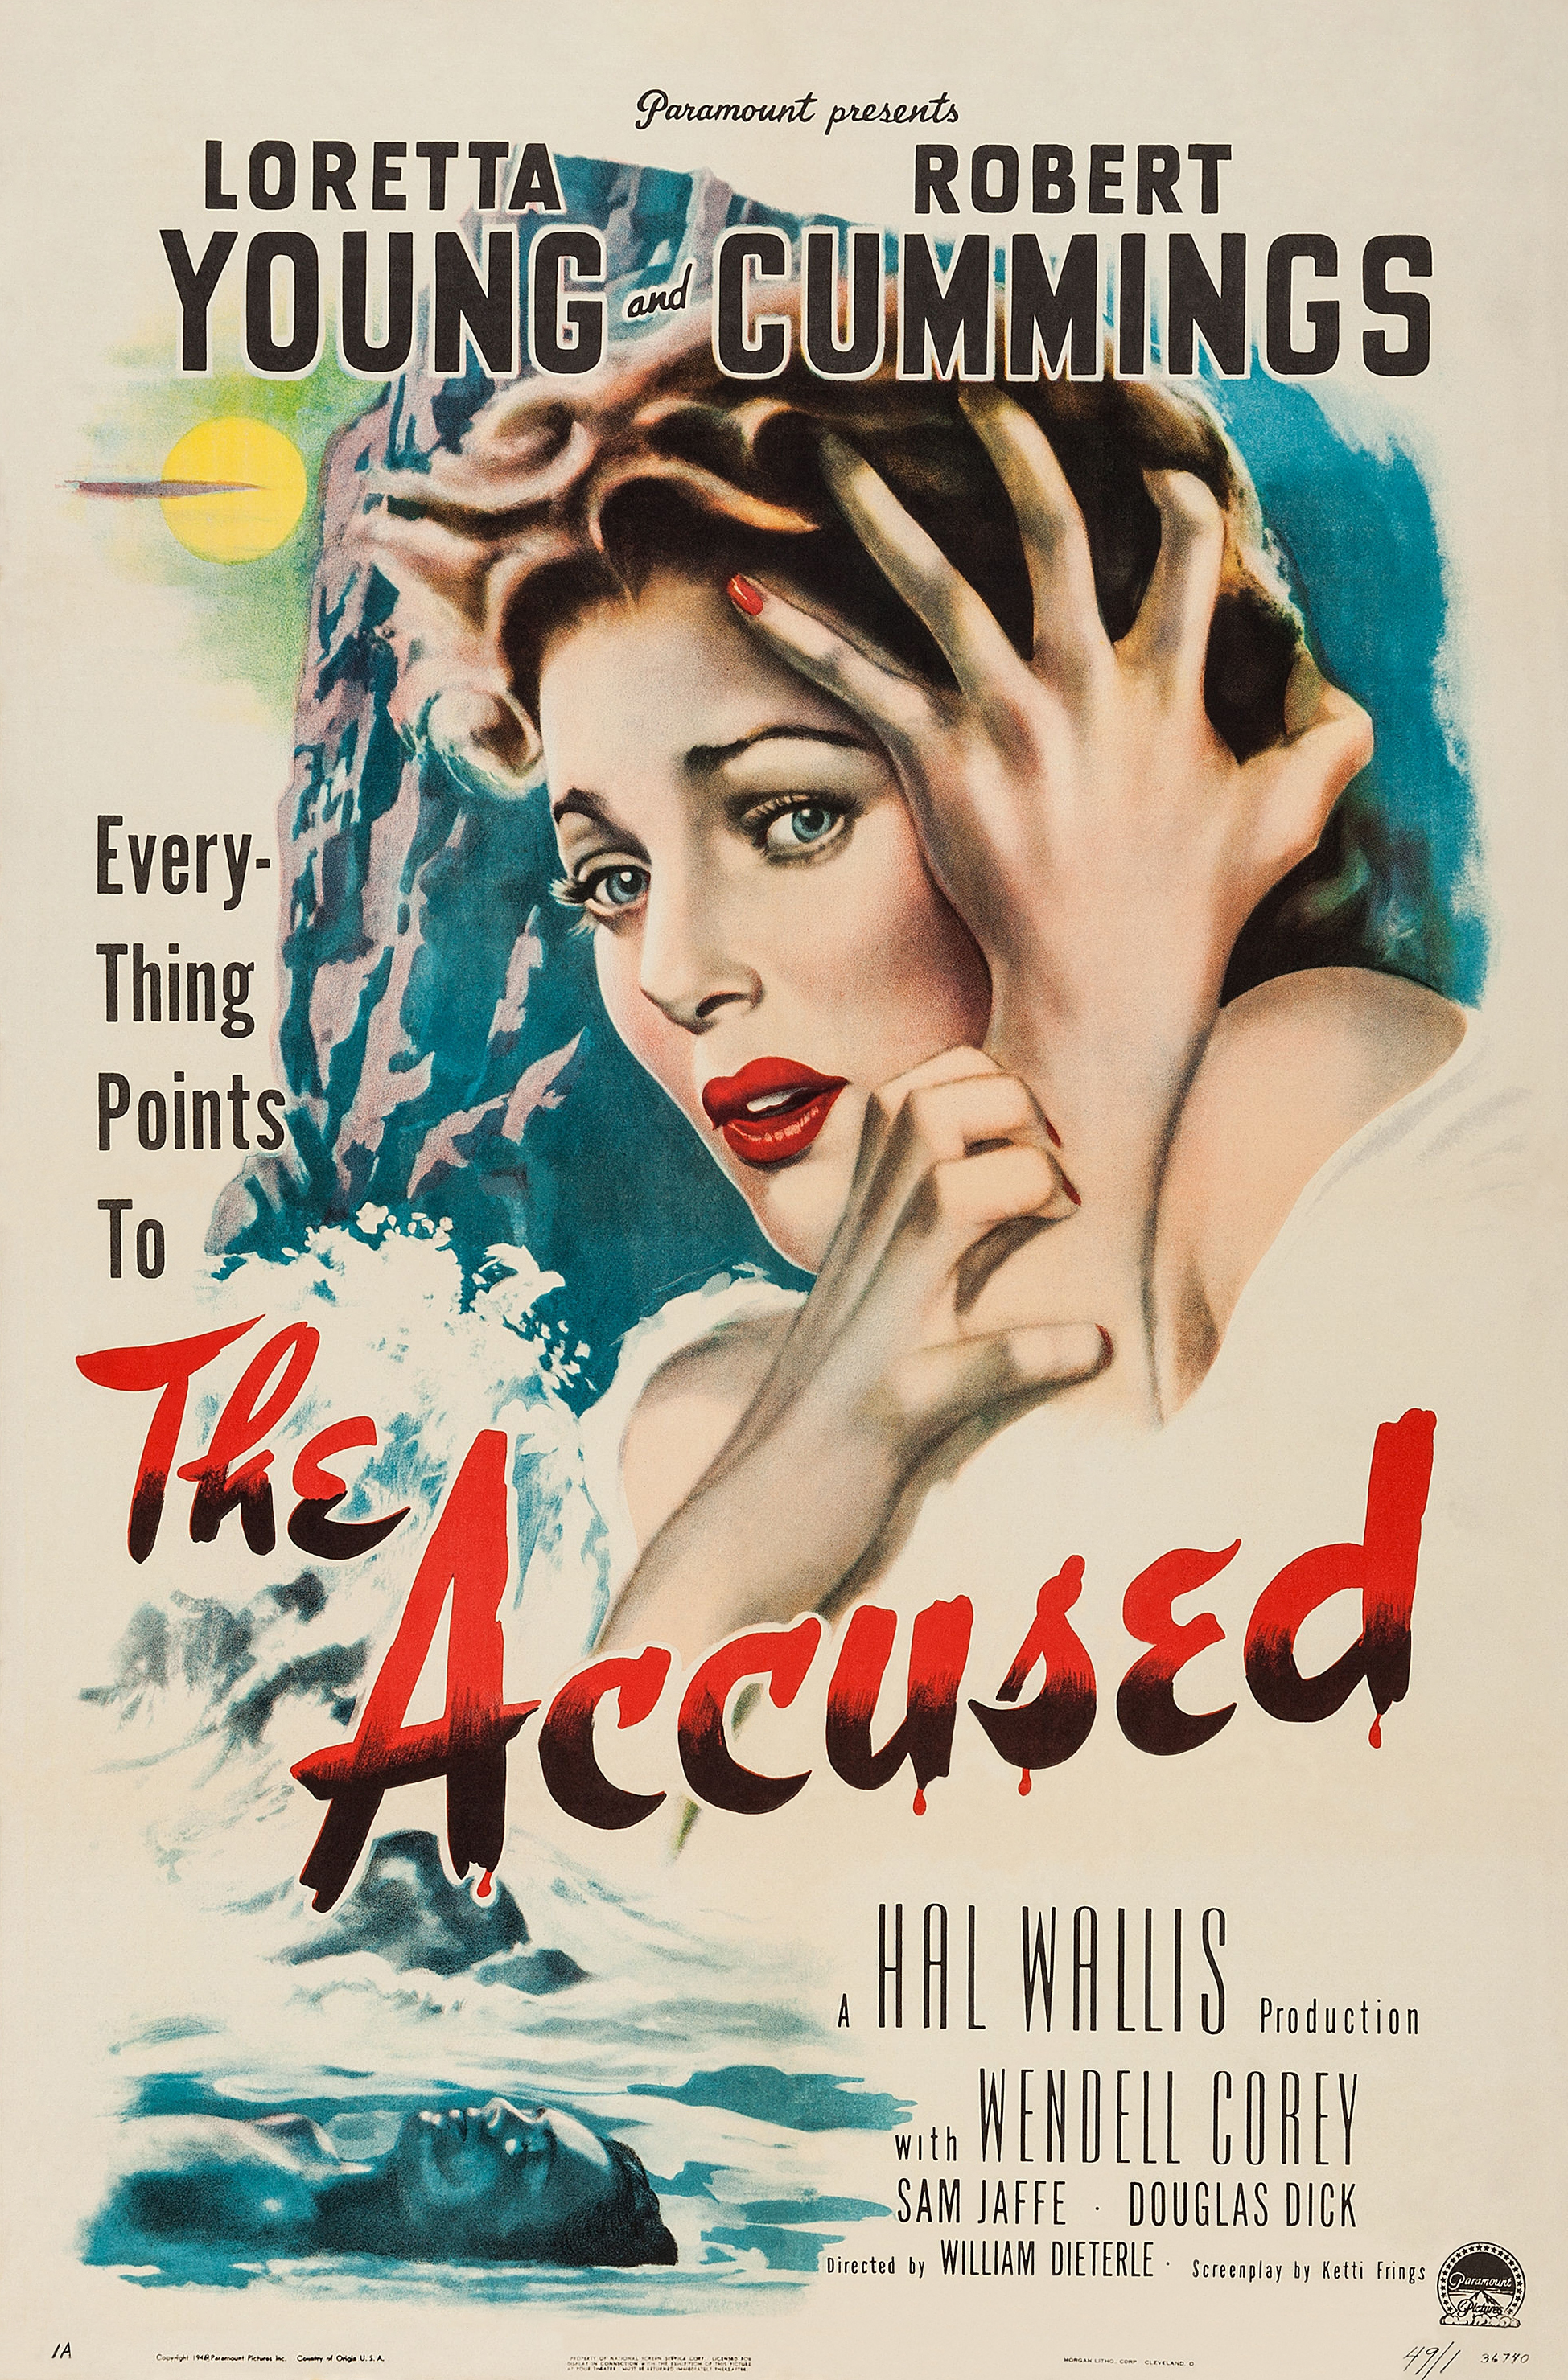 The Accused (1949) starring Loretta Young on DVD on DVD